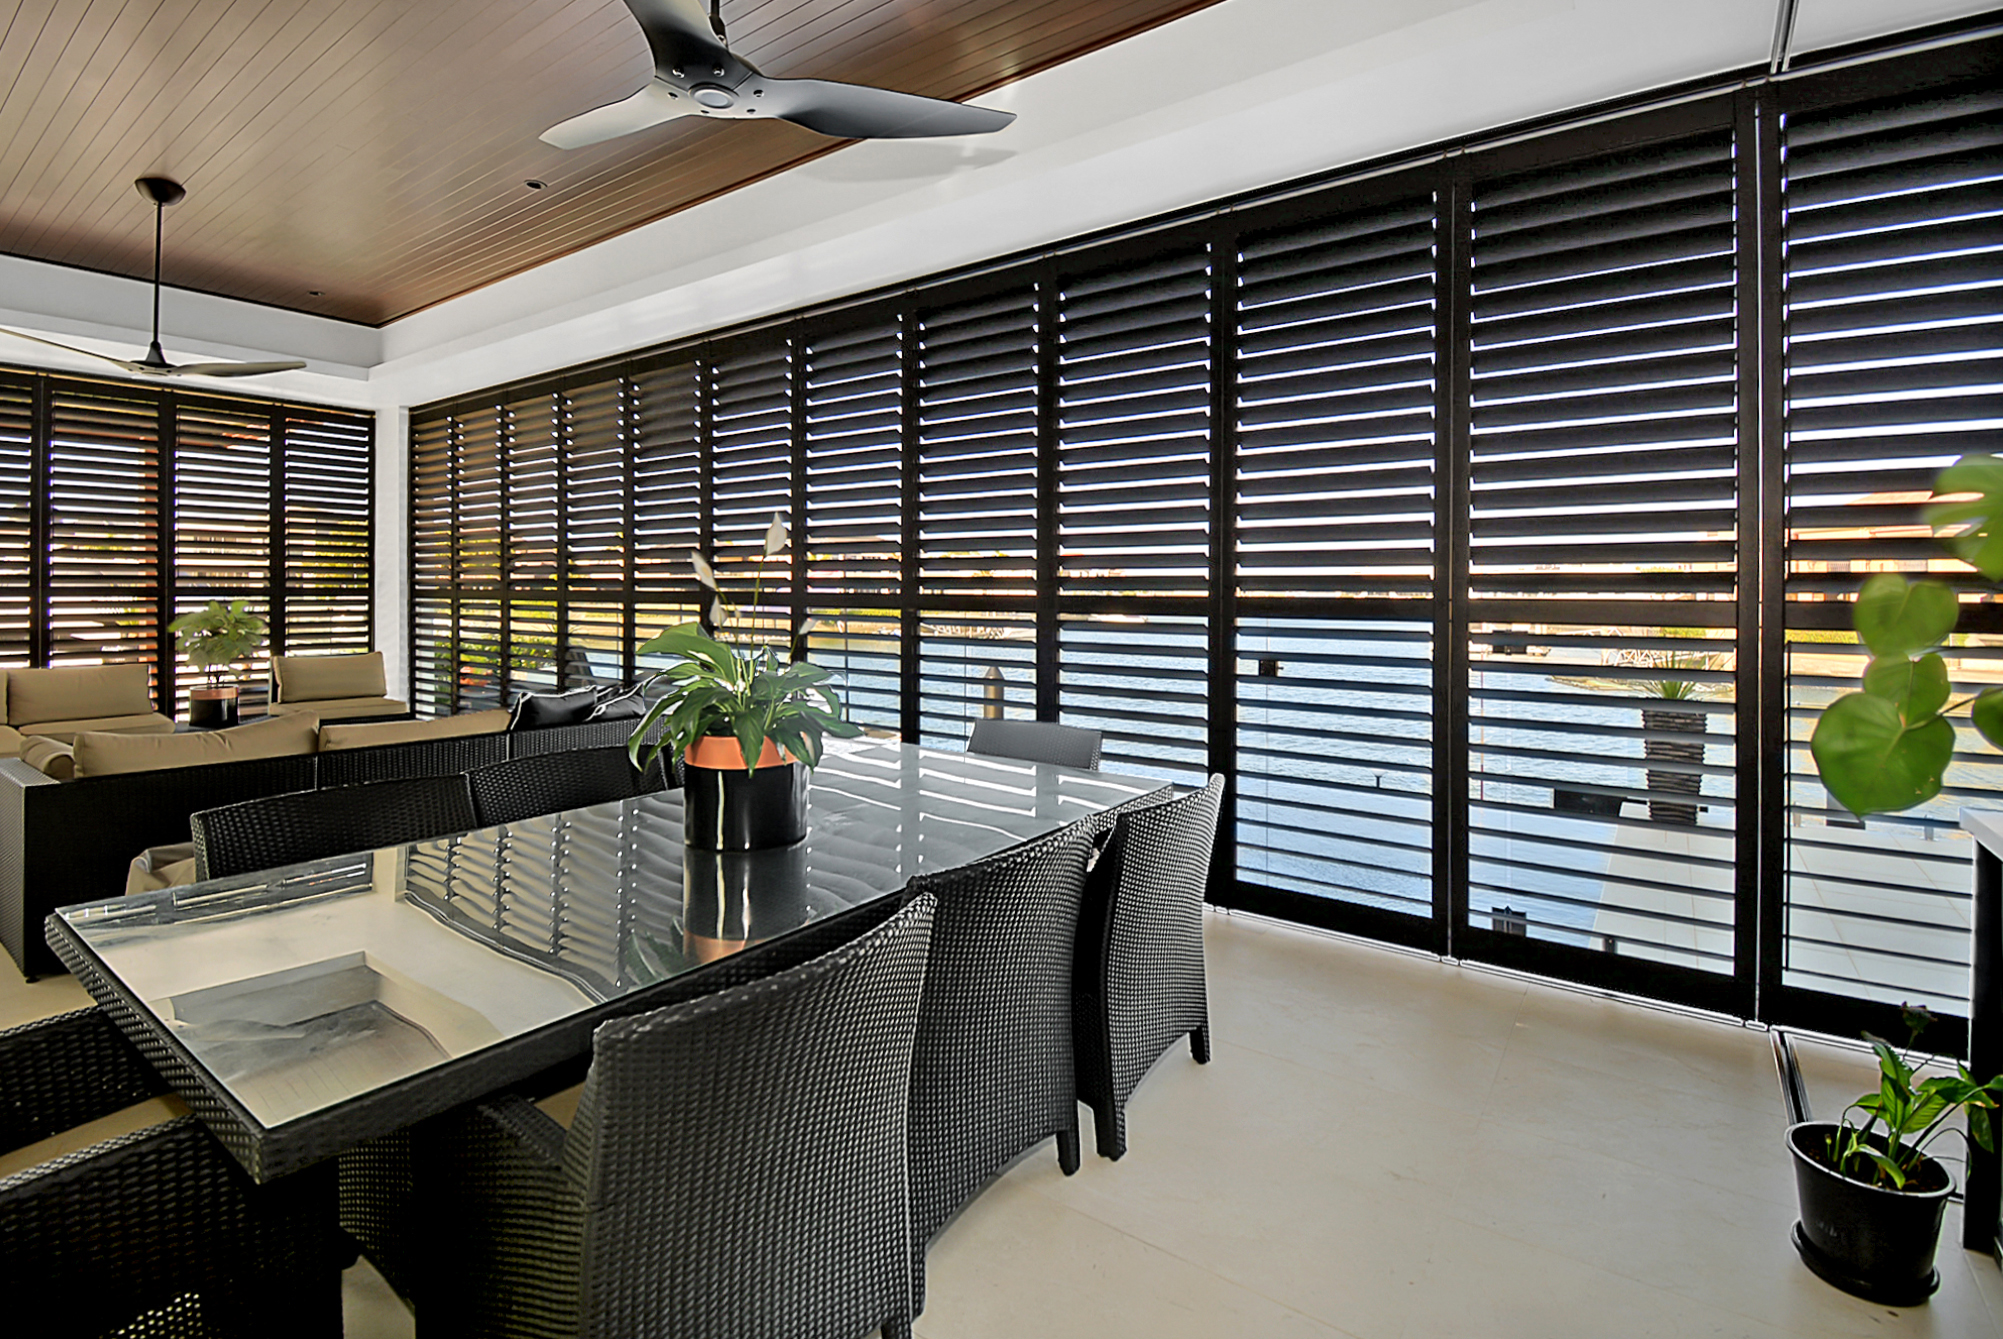 Large Black External Shutters on the Side Windows — Timber Tec Shutters In Ballina, NSW